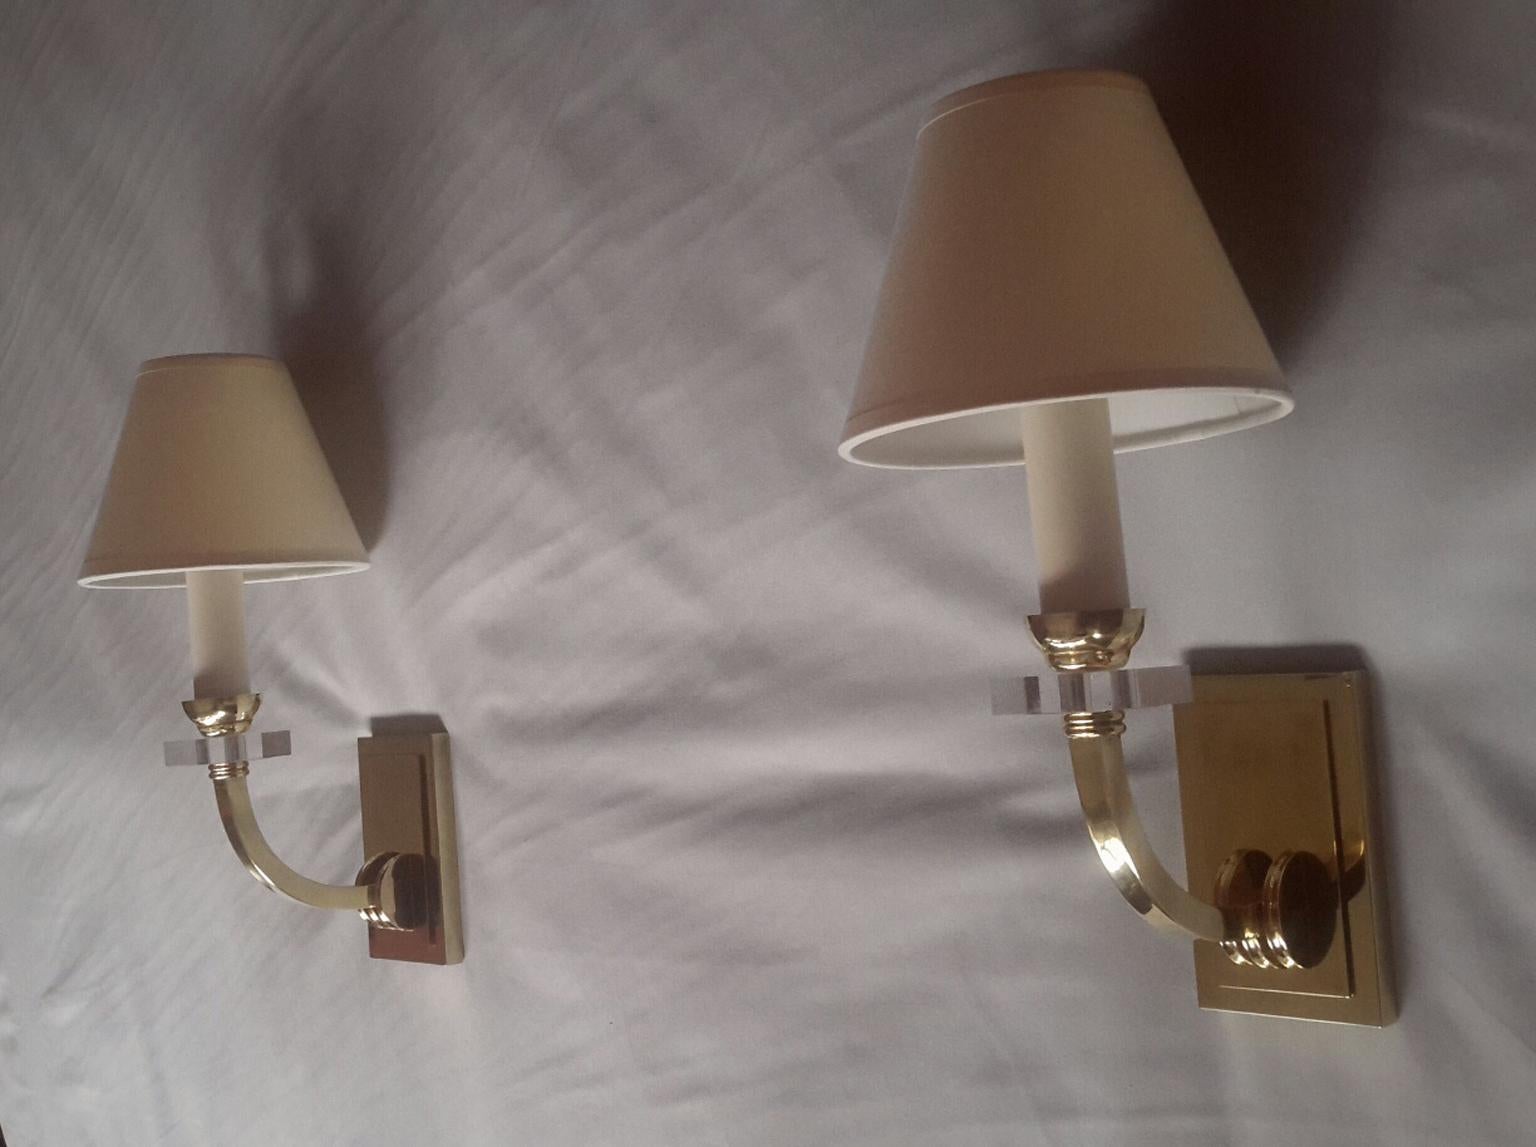 Very elegant pair of gilt bronze and Lucite glass wall sconces in the French neoclassical style of the mid-1950s by Jacques Adnet.
The sconces are in very good condition, new wired and suitable for US standards. (40 watts maxi per shade).
The